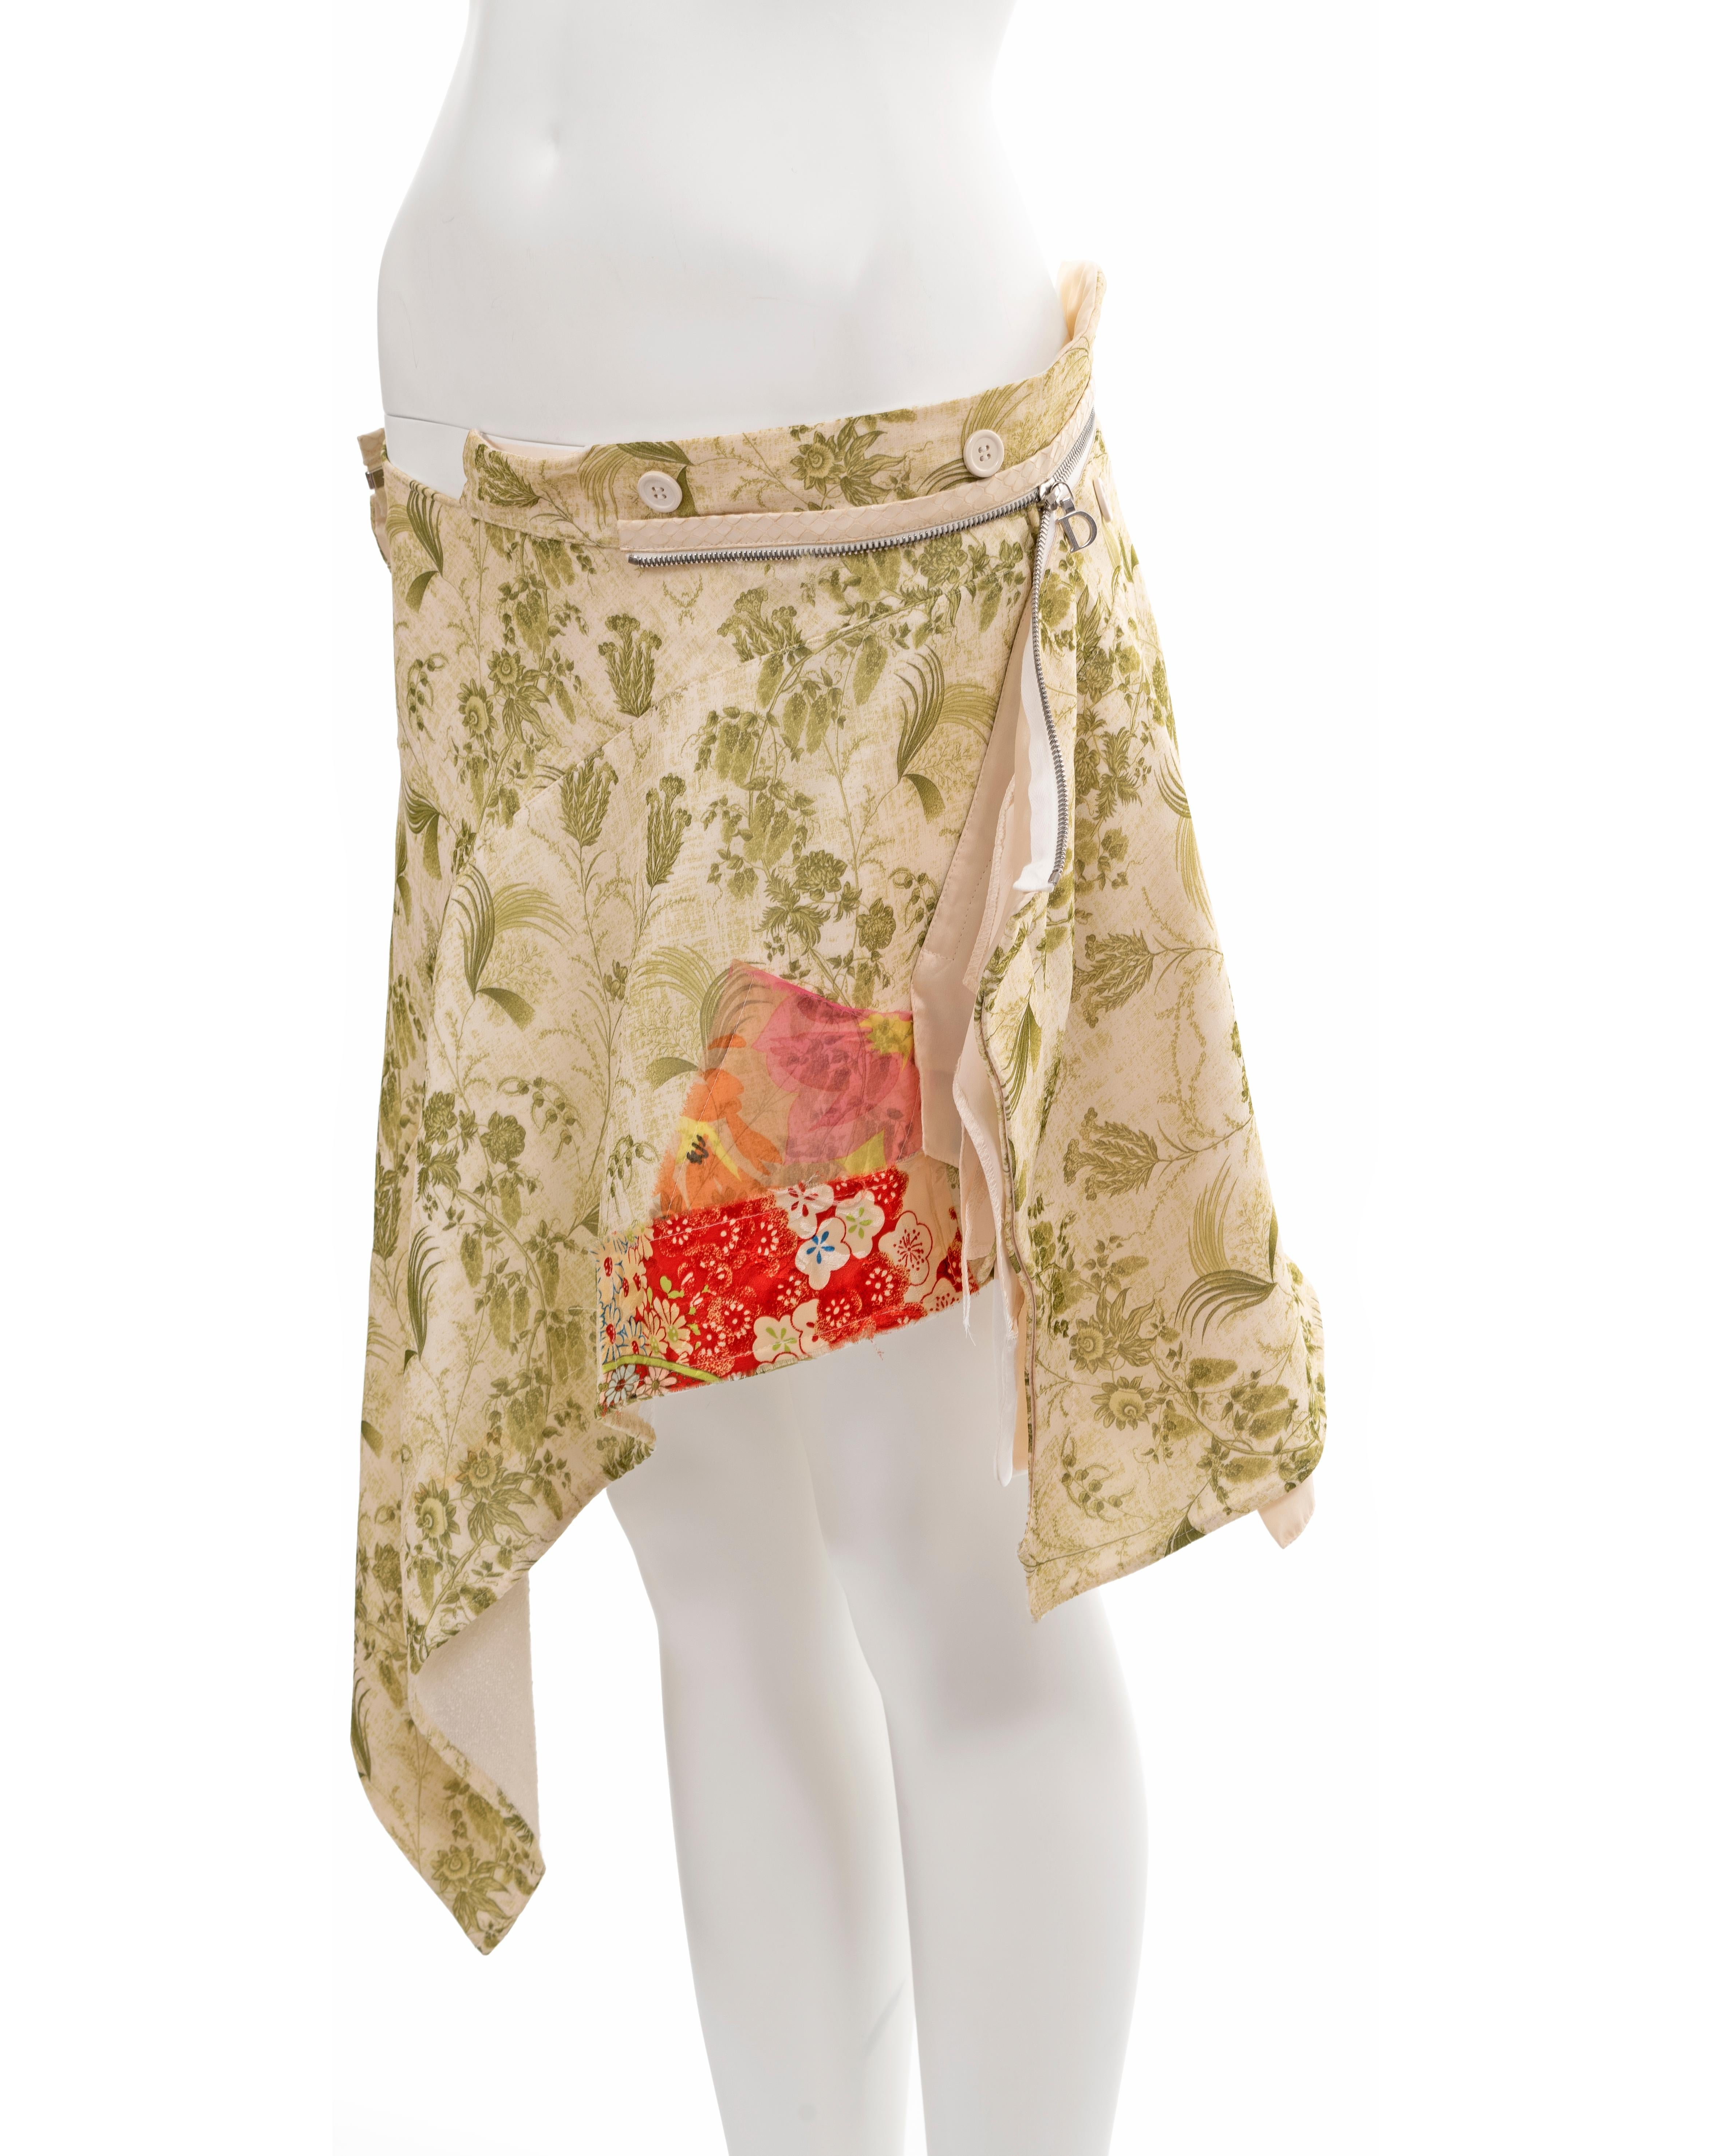 Christian Dior by John Galliano deconstructed floral silk wrap skirt, ss 2001 For Sale 3